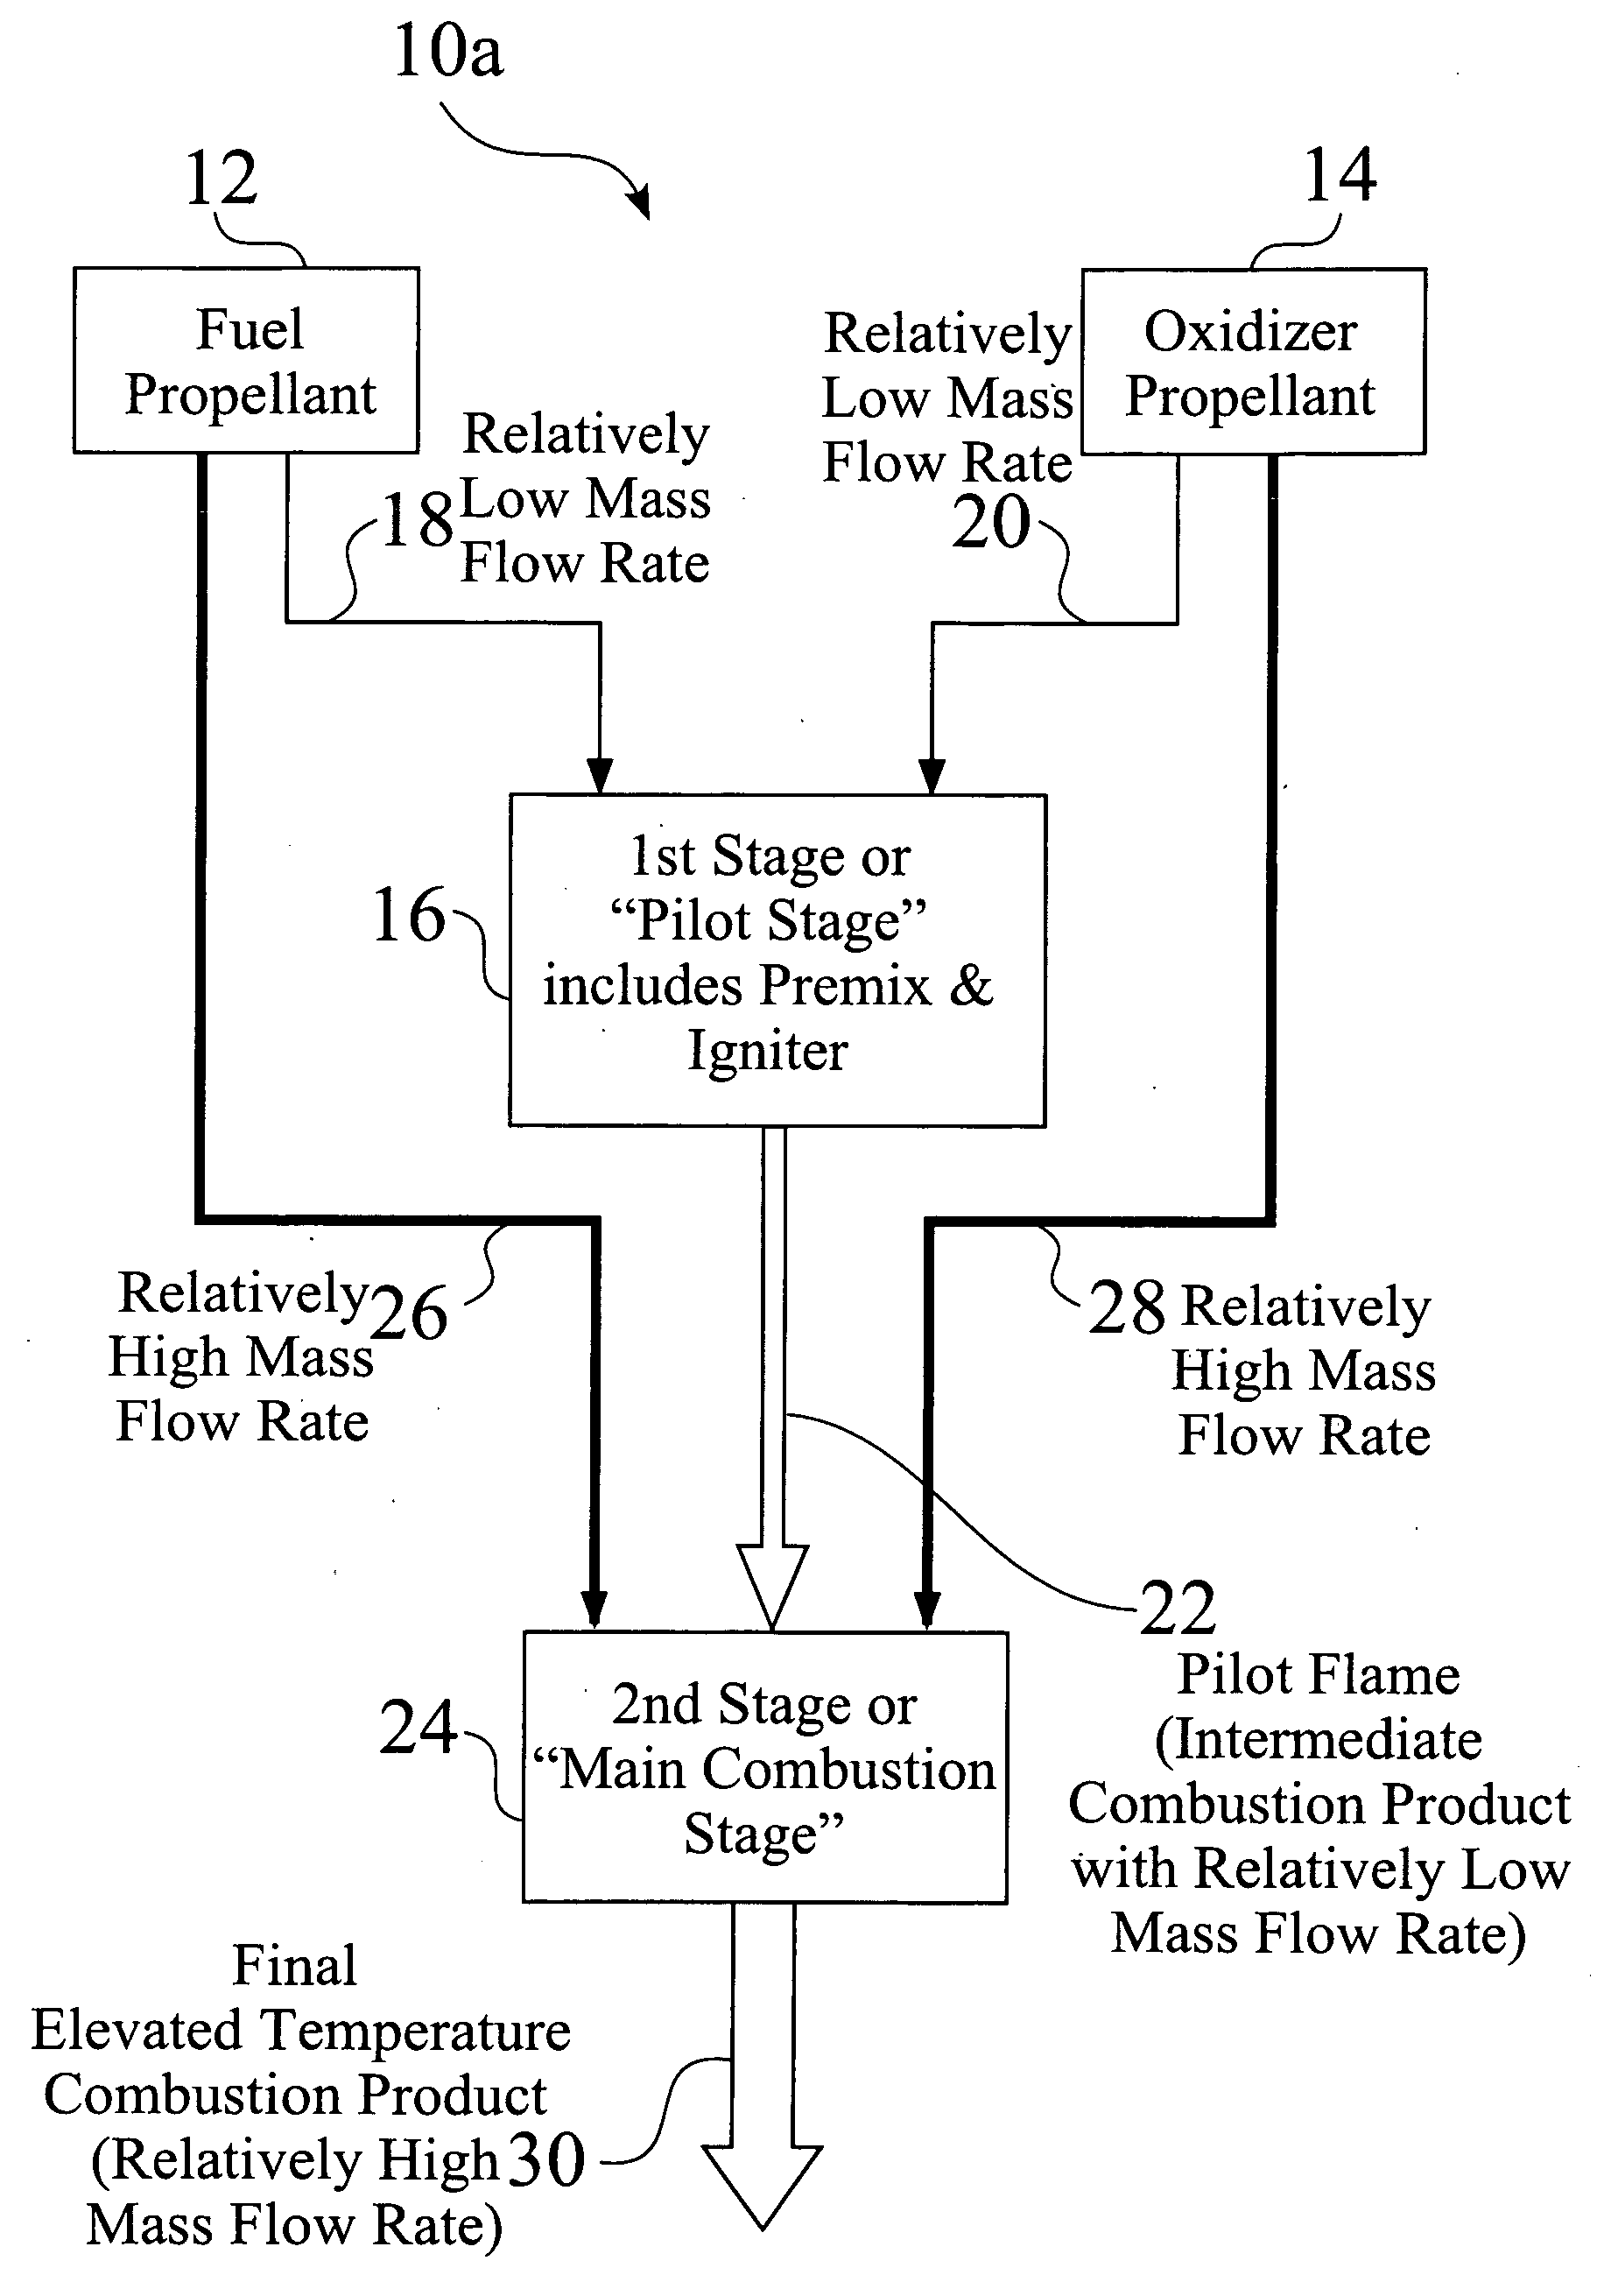 Two-stage ignition system